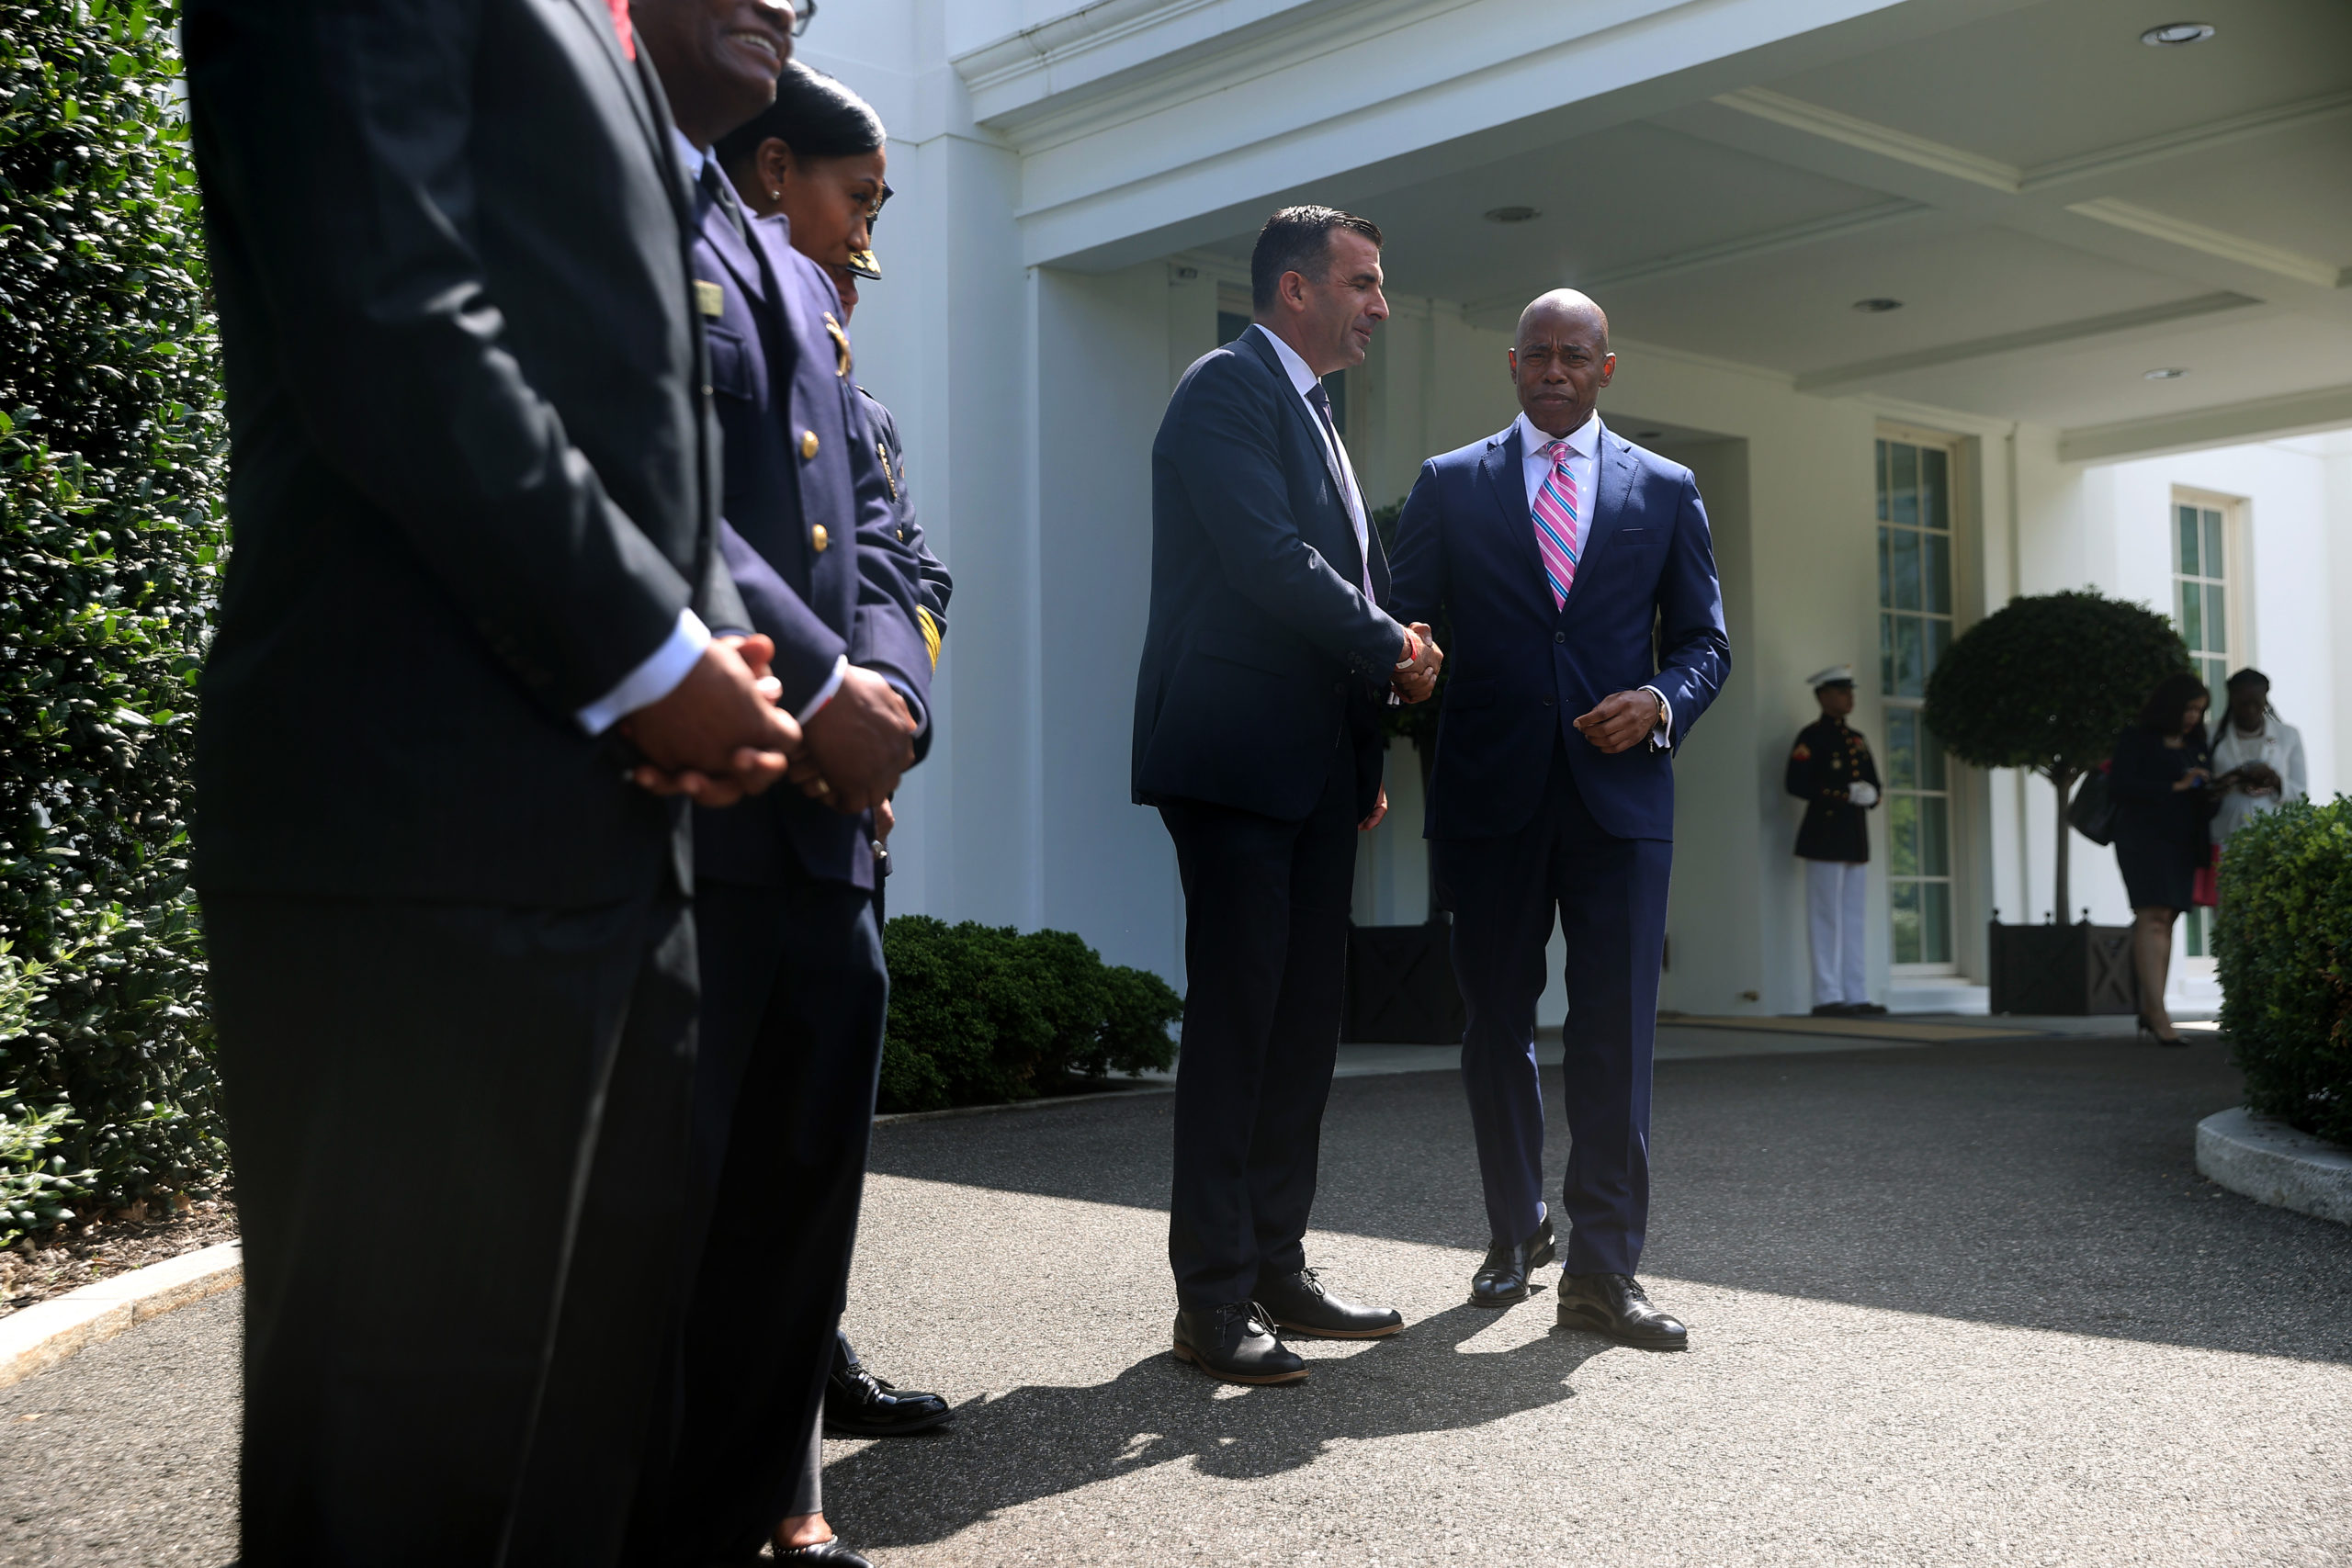 Brooklyn Borough President and New York City mayoral nominee Eric Adams (R) shakes hands with San Jose Mayor Sam Liccardo outside the West Wing following a meeting with U.S. President Joe Biden and U.S. Attorney General Merrick Garland about reducing gun violence at the White House on July 12, 2021 in Washington, DC. The meeting included law enforcement leaders, elected officials, and others. (Photo by Chip Somodevilla/Getty Images)